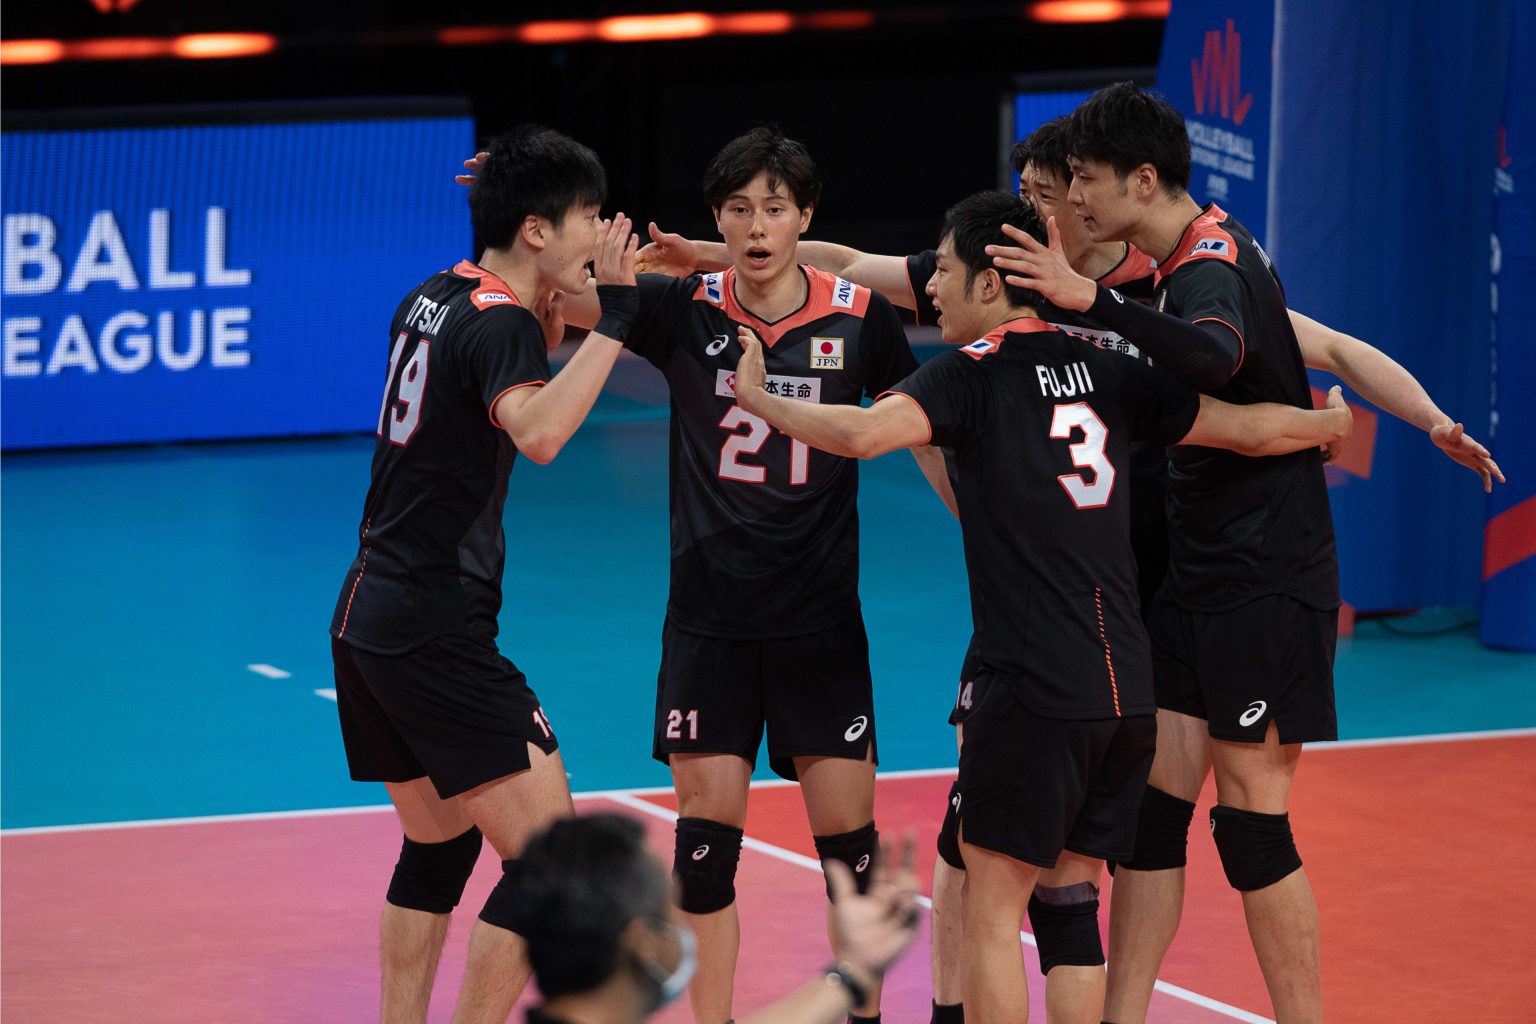 RI HAKU: “WE FOCUS ON ONE GAME AT A TIME” - Asian Volleyball Confederation